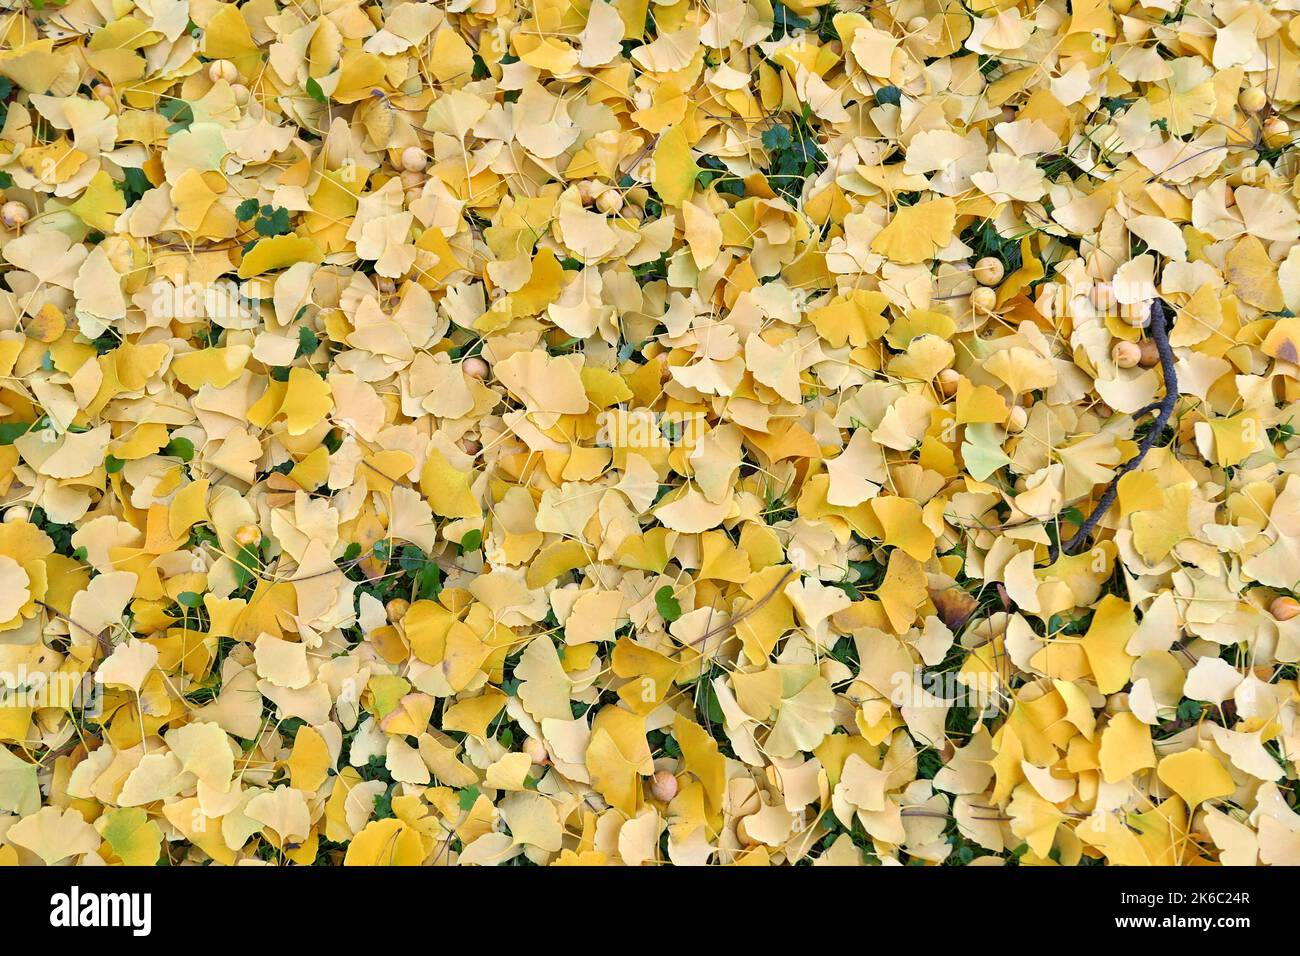 Autumn leaves background. Ginkgo biloba fallen leaves and fruits. Stock Photo